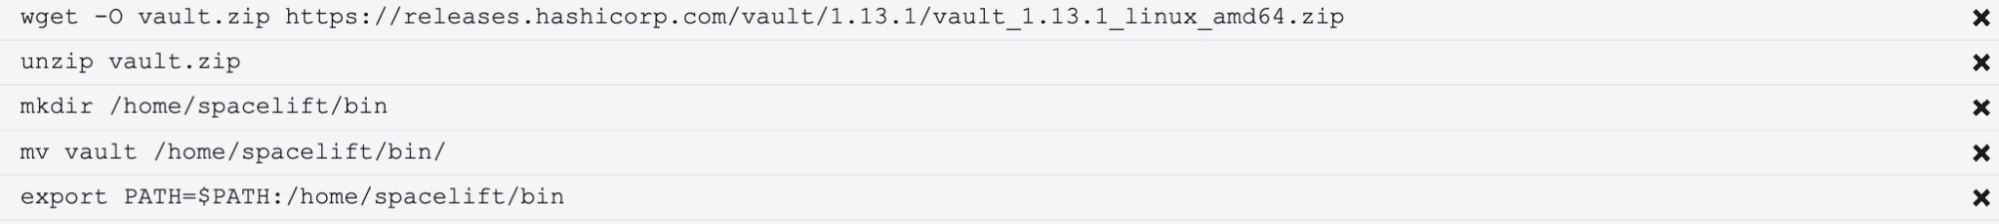 install Vault in a before_init hook